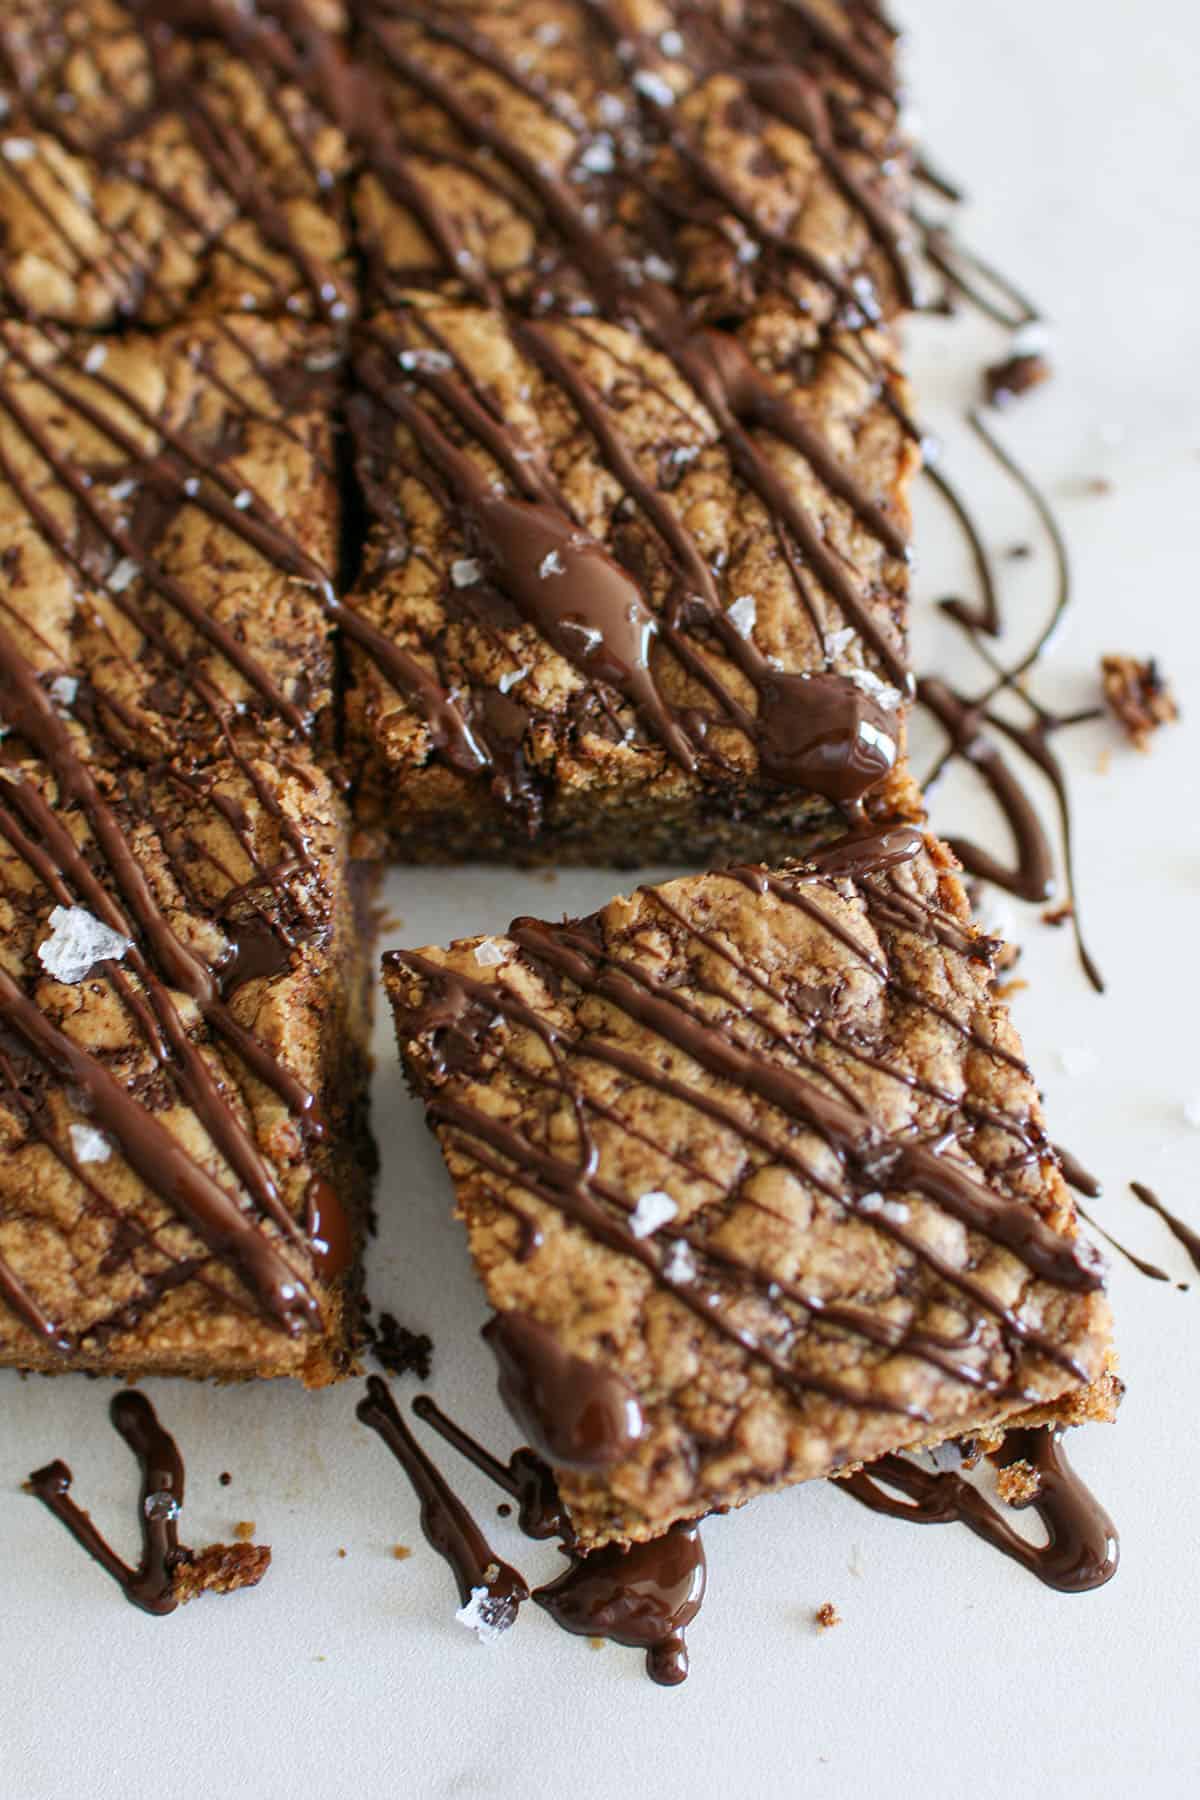 Chocolate Chunk Cookie Butter Bars on a white marble background with one bar slightly offset. The bars have drizzled chocolate and flaky sea salt on top.